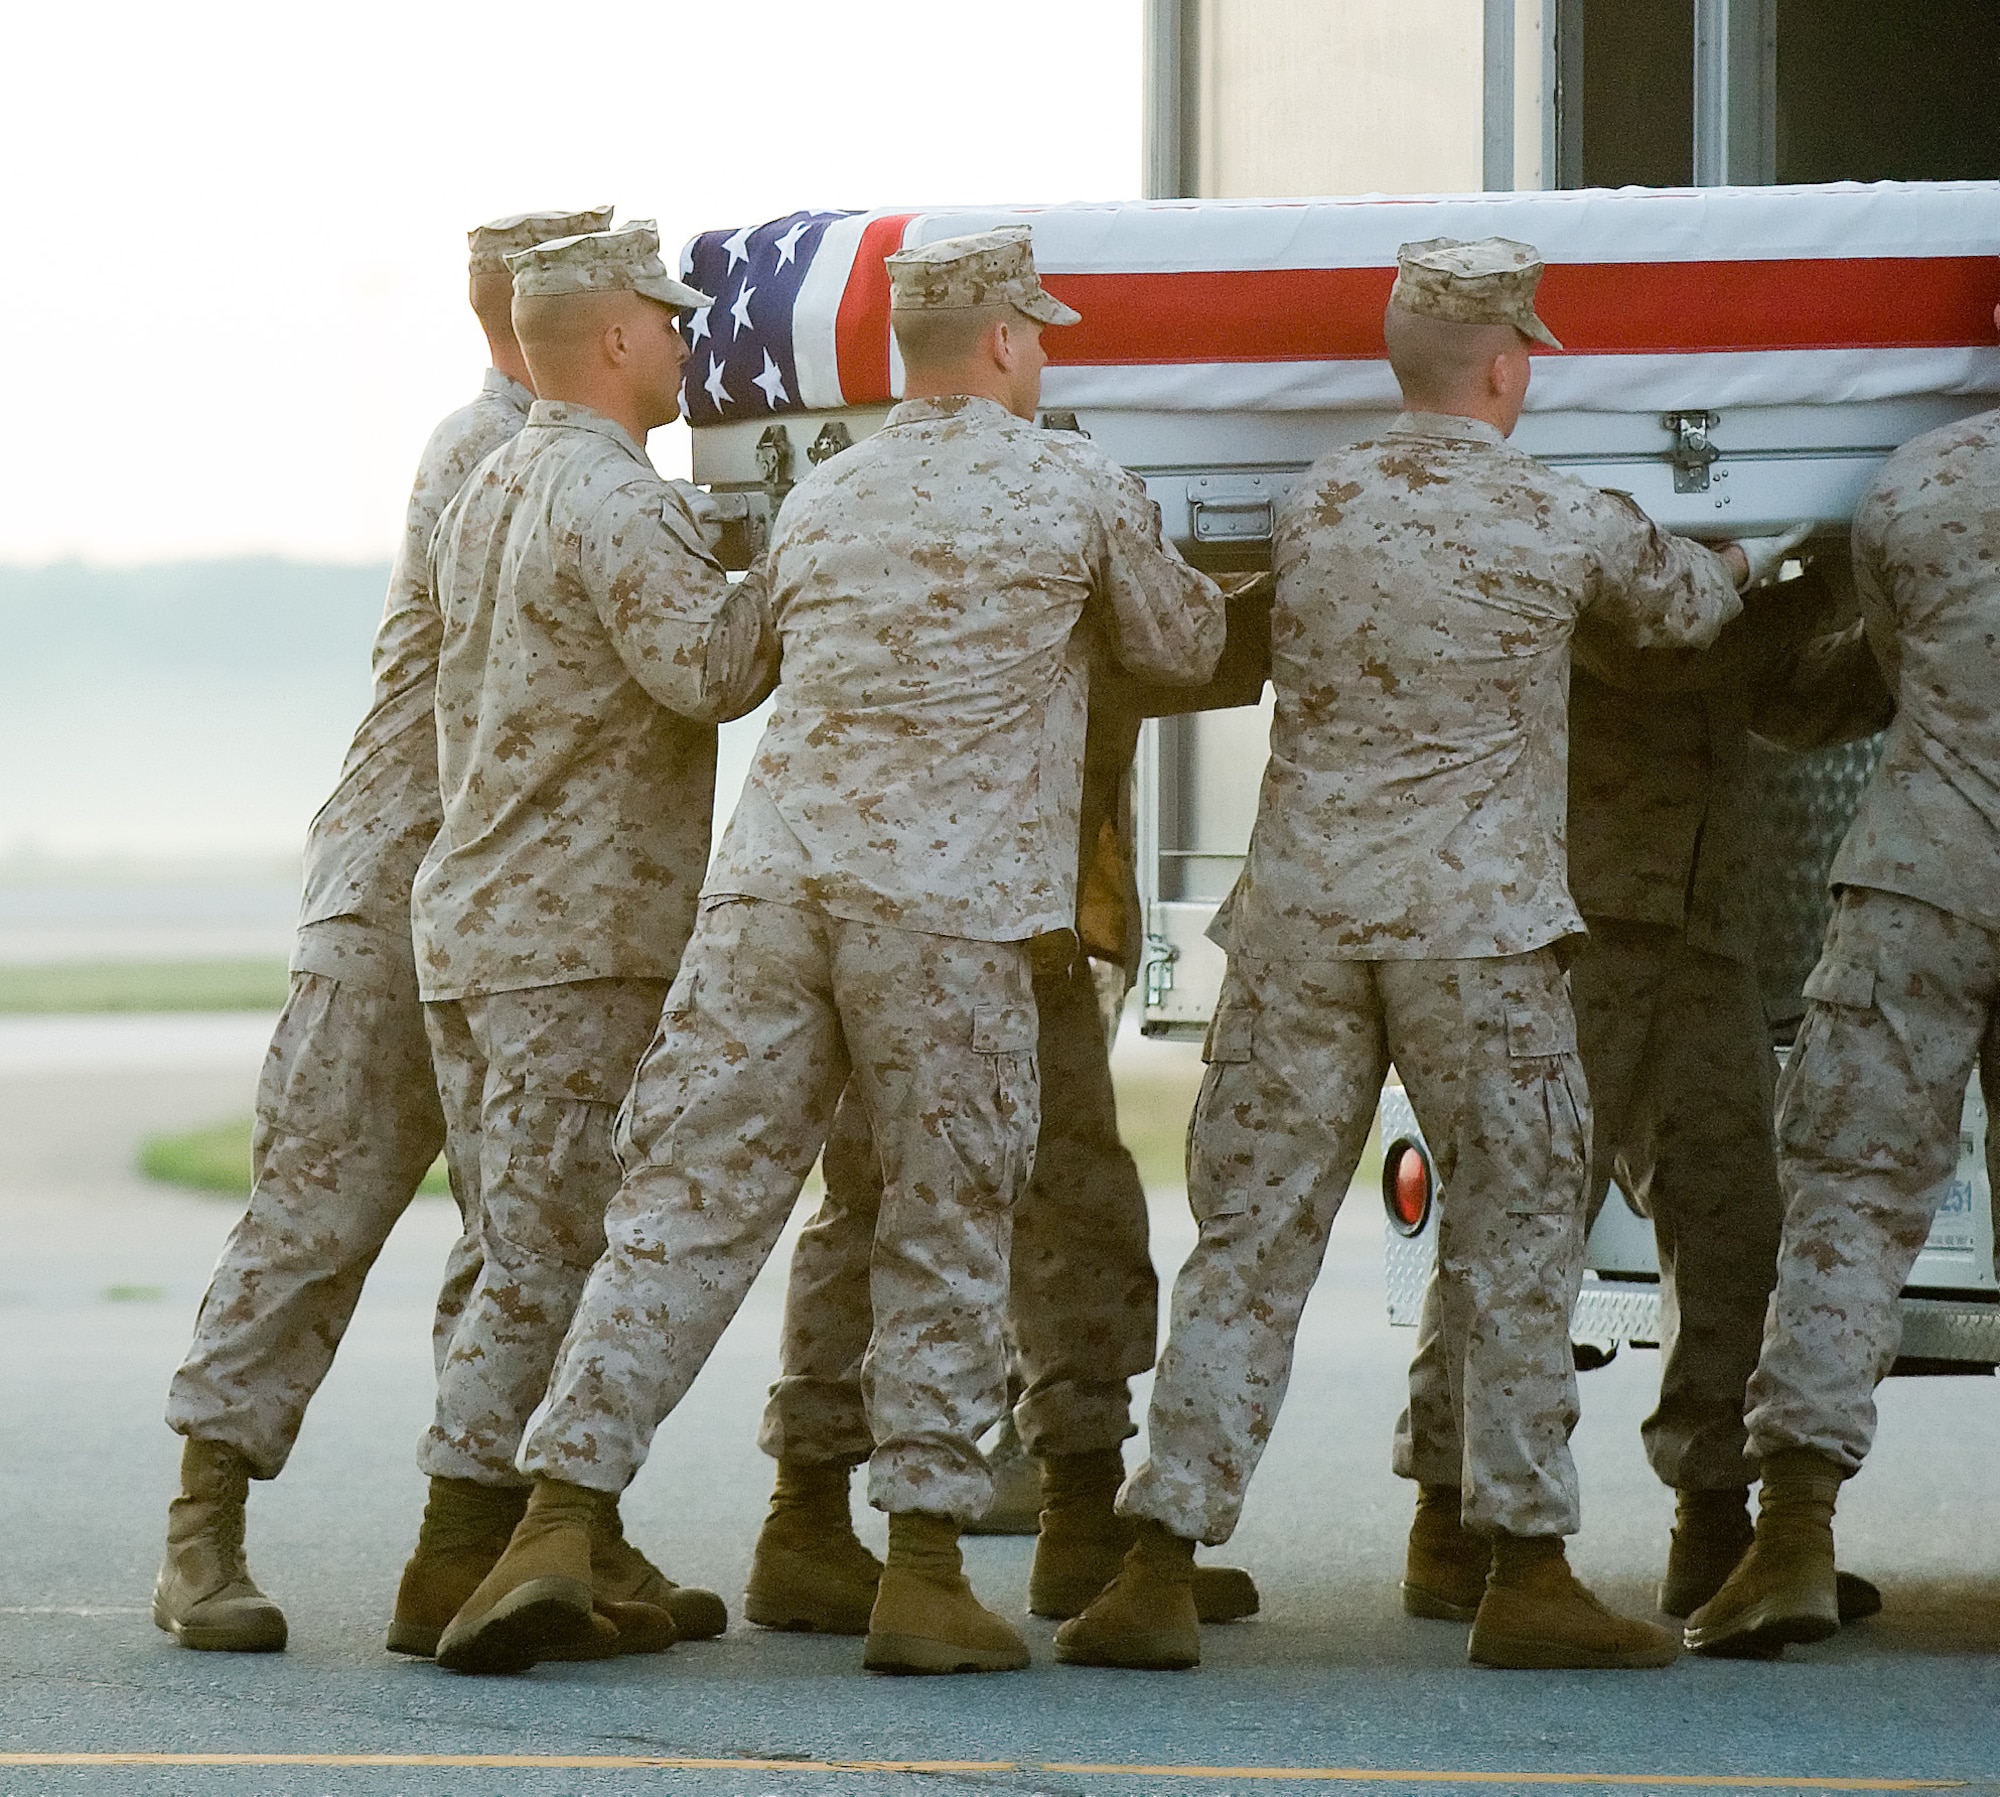 25 June 2010  USAF Photo by Jason Minto.  A U.S. Marine Corps carry team transfers the remains of Marine Cpl Claudio Patino IV of Yorba Linda, CA., at Dover Air Force Base, Del., June 25, 2010.  